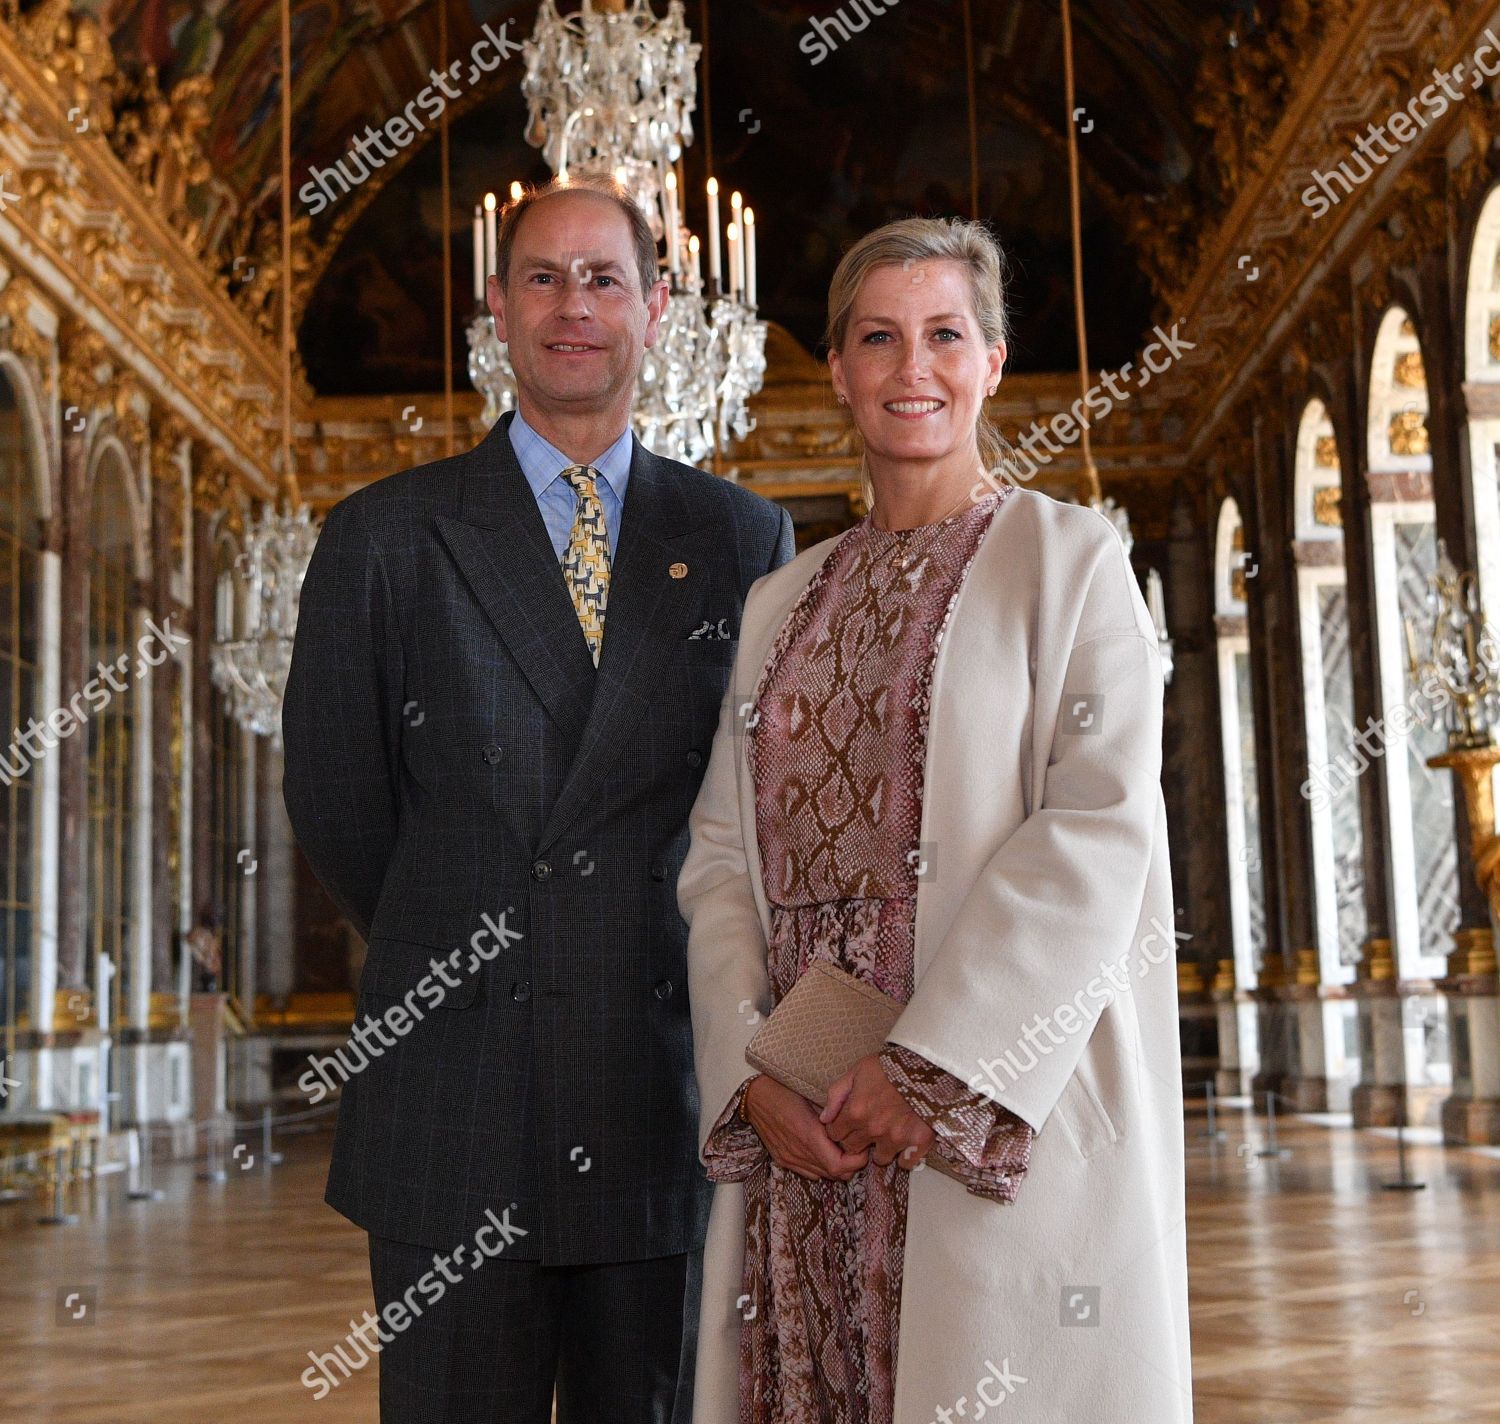 prince-edward-and-sophie-countess-of-wessex-visit-to-paris-france-shutterstock-editorial-9907868ab.jpg